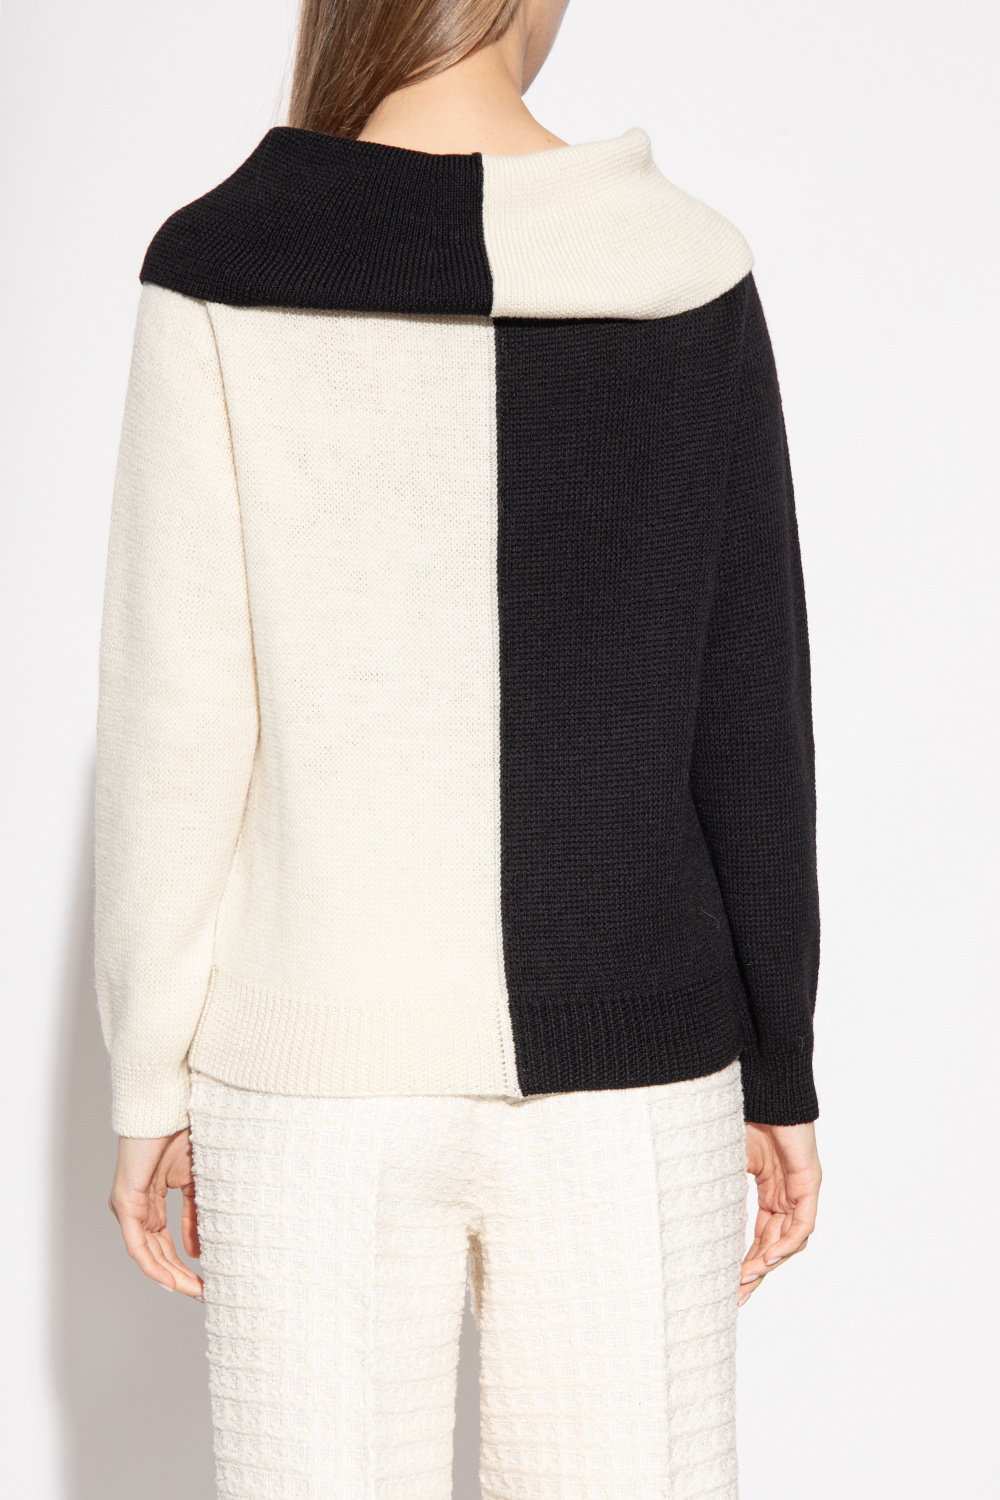 Gucci collabore Wool sweater